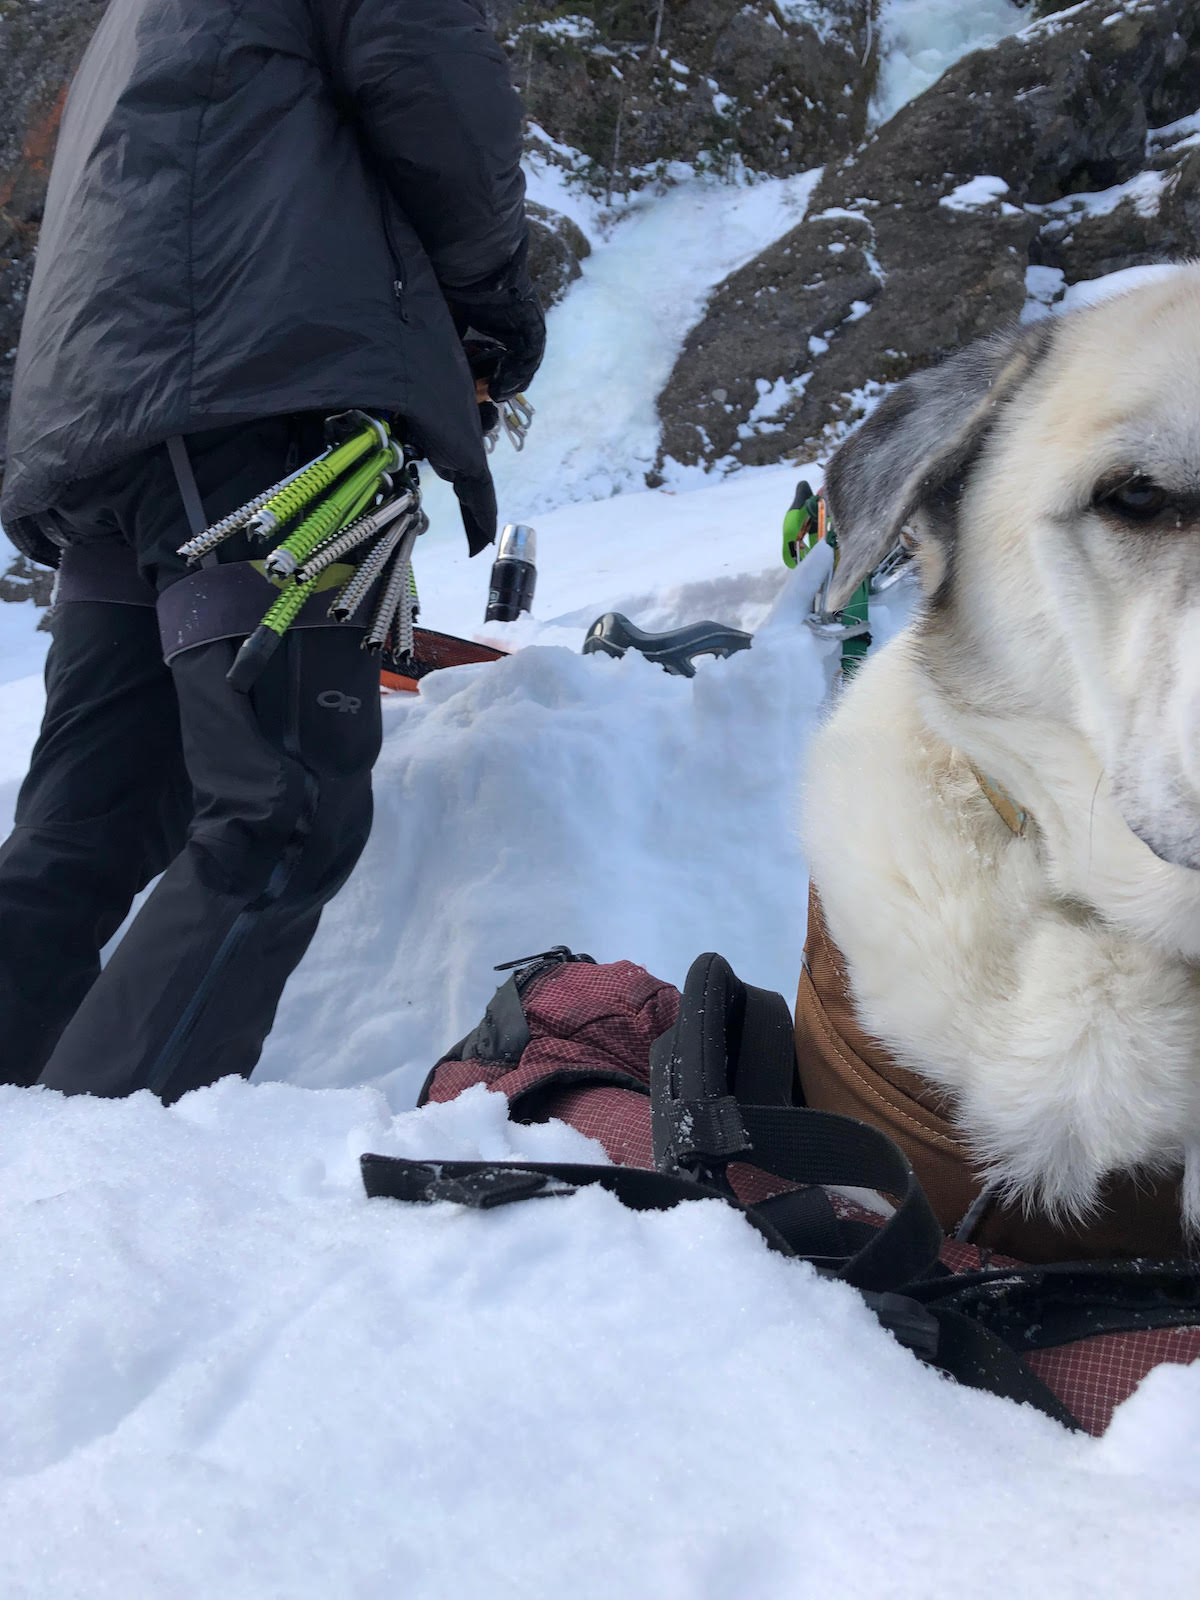 One of the black, reservoir tip caps can be seen on the long Ultralight Express screw that is racked on the author's harness in the background while Kanut the dog stares down the camera. [Photo] Chris Luehder